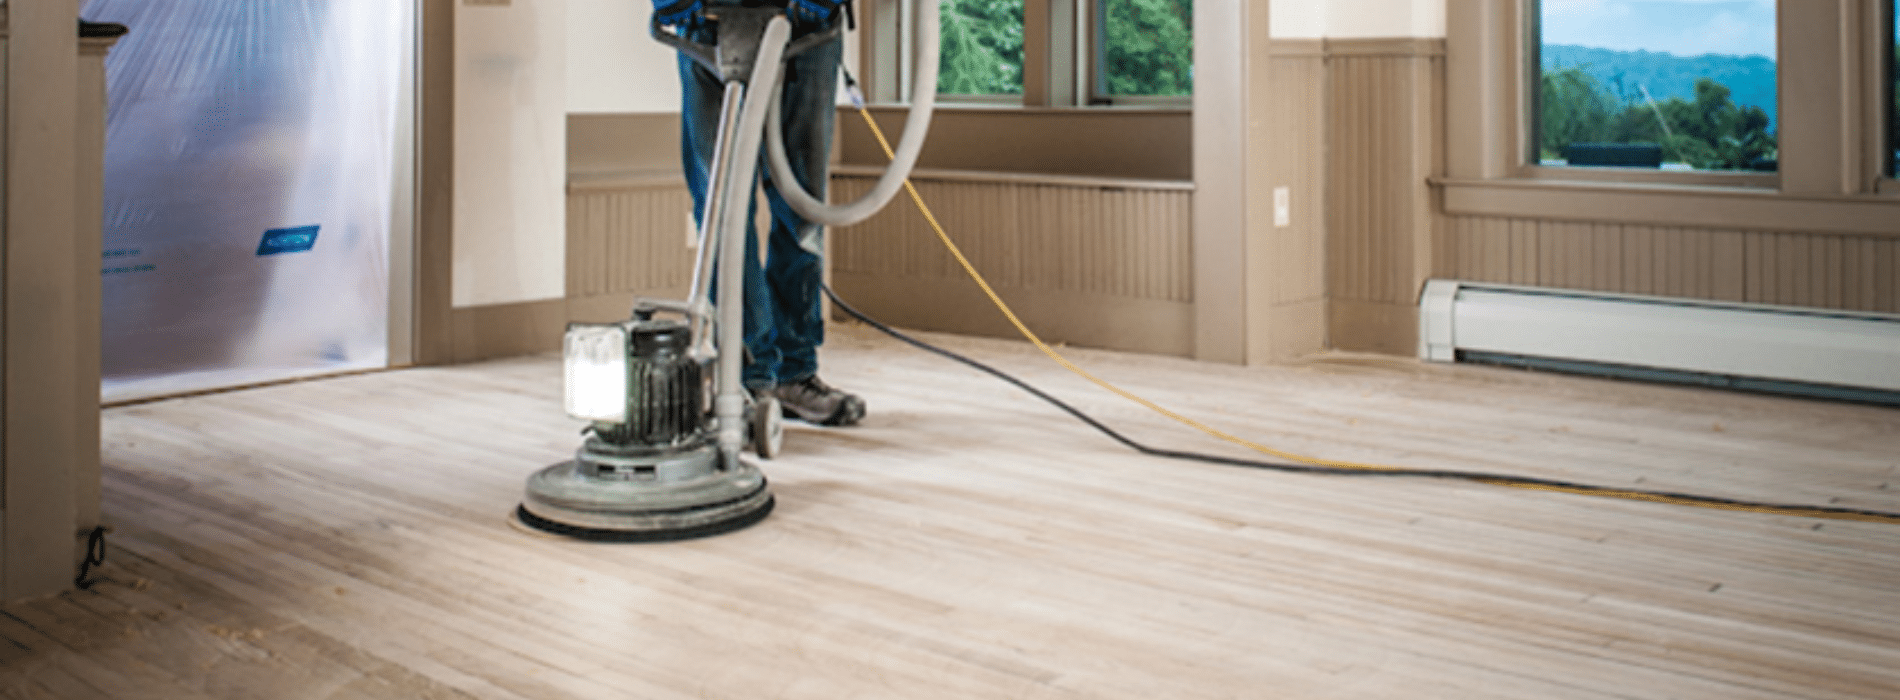 Mr Sander® in Brentwood, CM12, meticulously restoring a herringbone floor using a 2.2 kW Bona belt sander (230V, 50Hz, 200x750 mm). The HEPA-filtered dust extraction system guarantees a clean process, highlighting the company's commitment to quality and cleanliness.